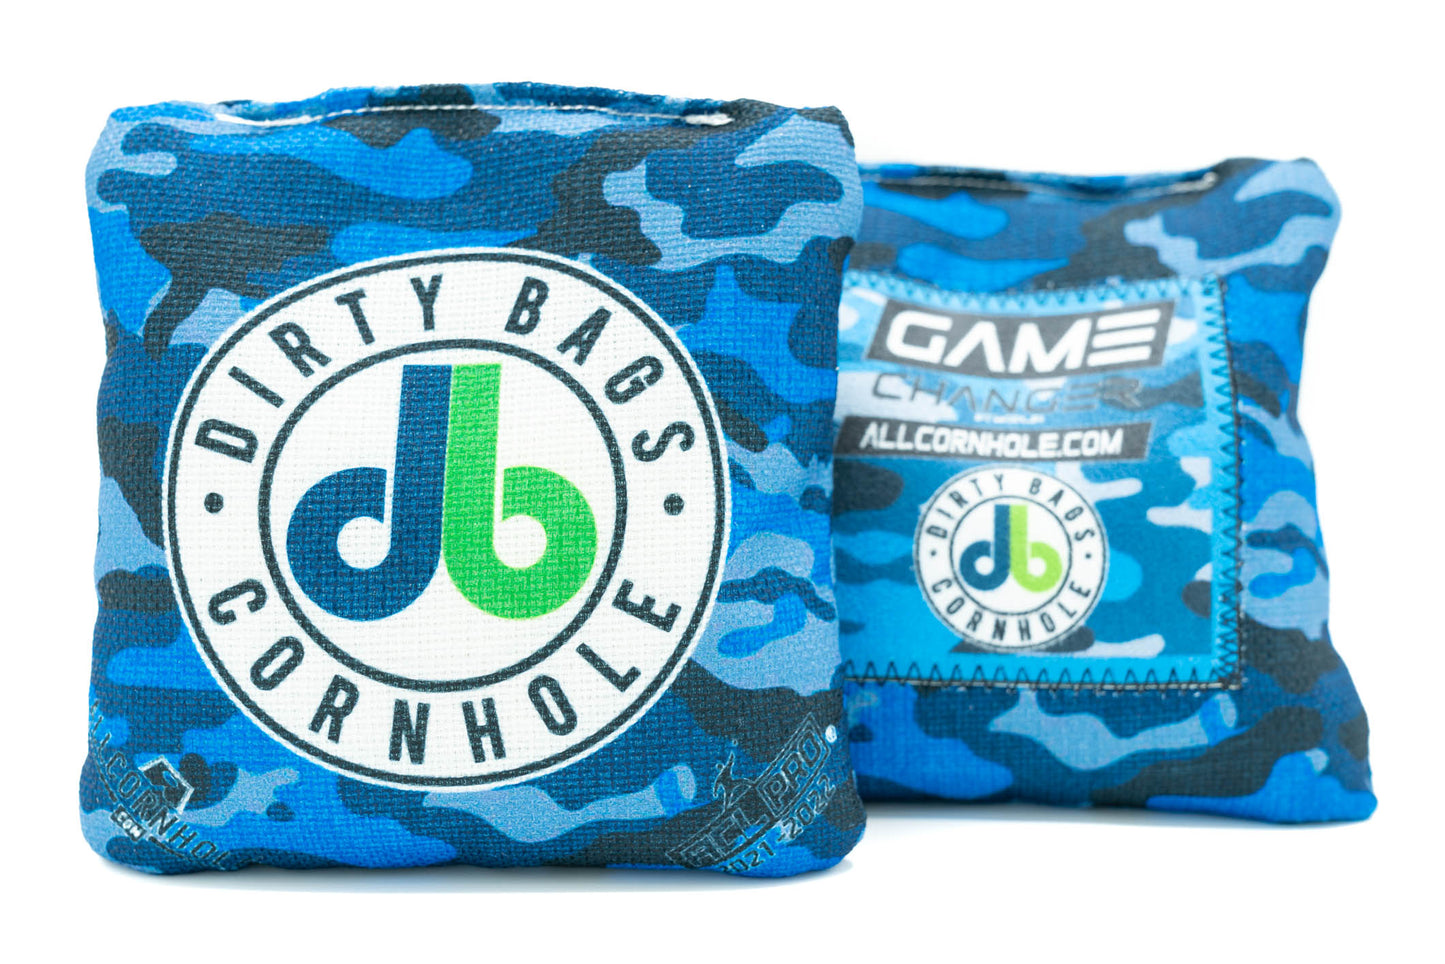 Game Changer Cornhole Bags - Camouflage Full Print  (Set of 4)